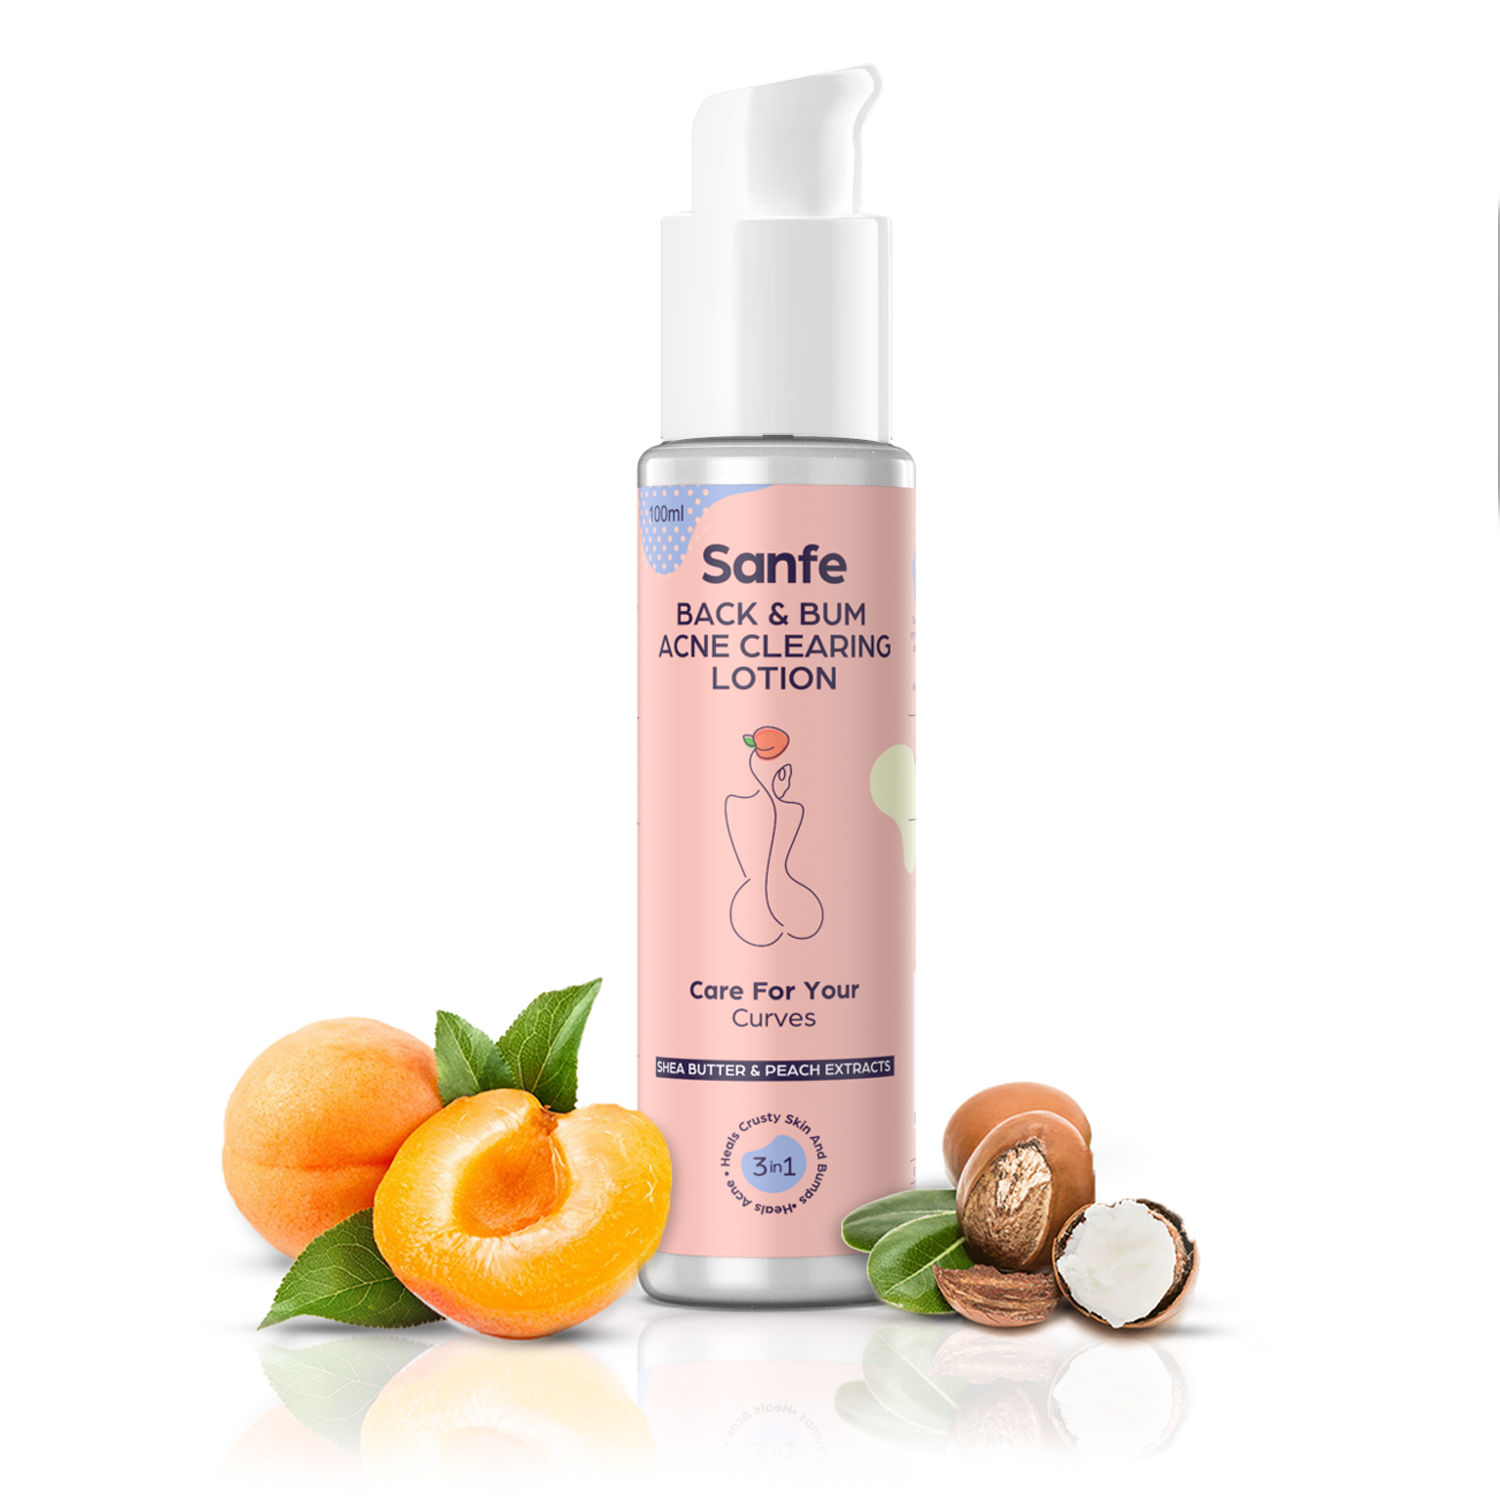 Sanfe Back & Bum Anti-Cellulite Cream for Brightening with Coconut & Peach  extracts-100g, Reduces Cellulites, Firms the skin, Lifts the Bum